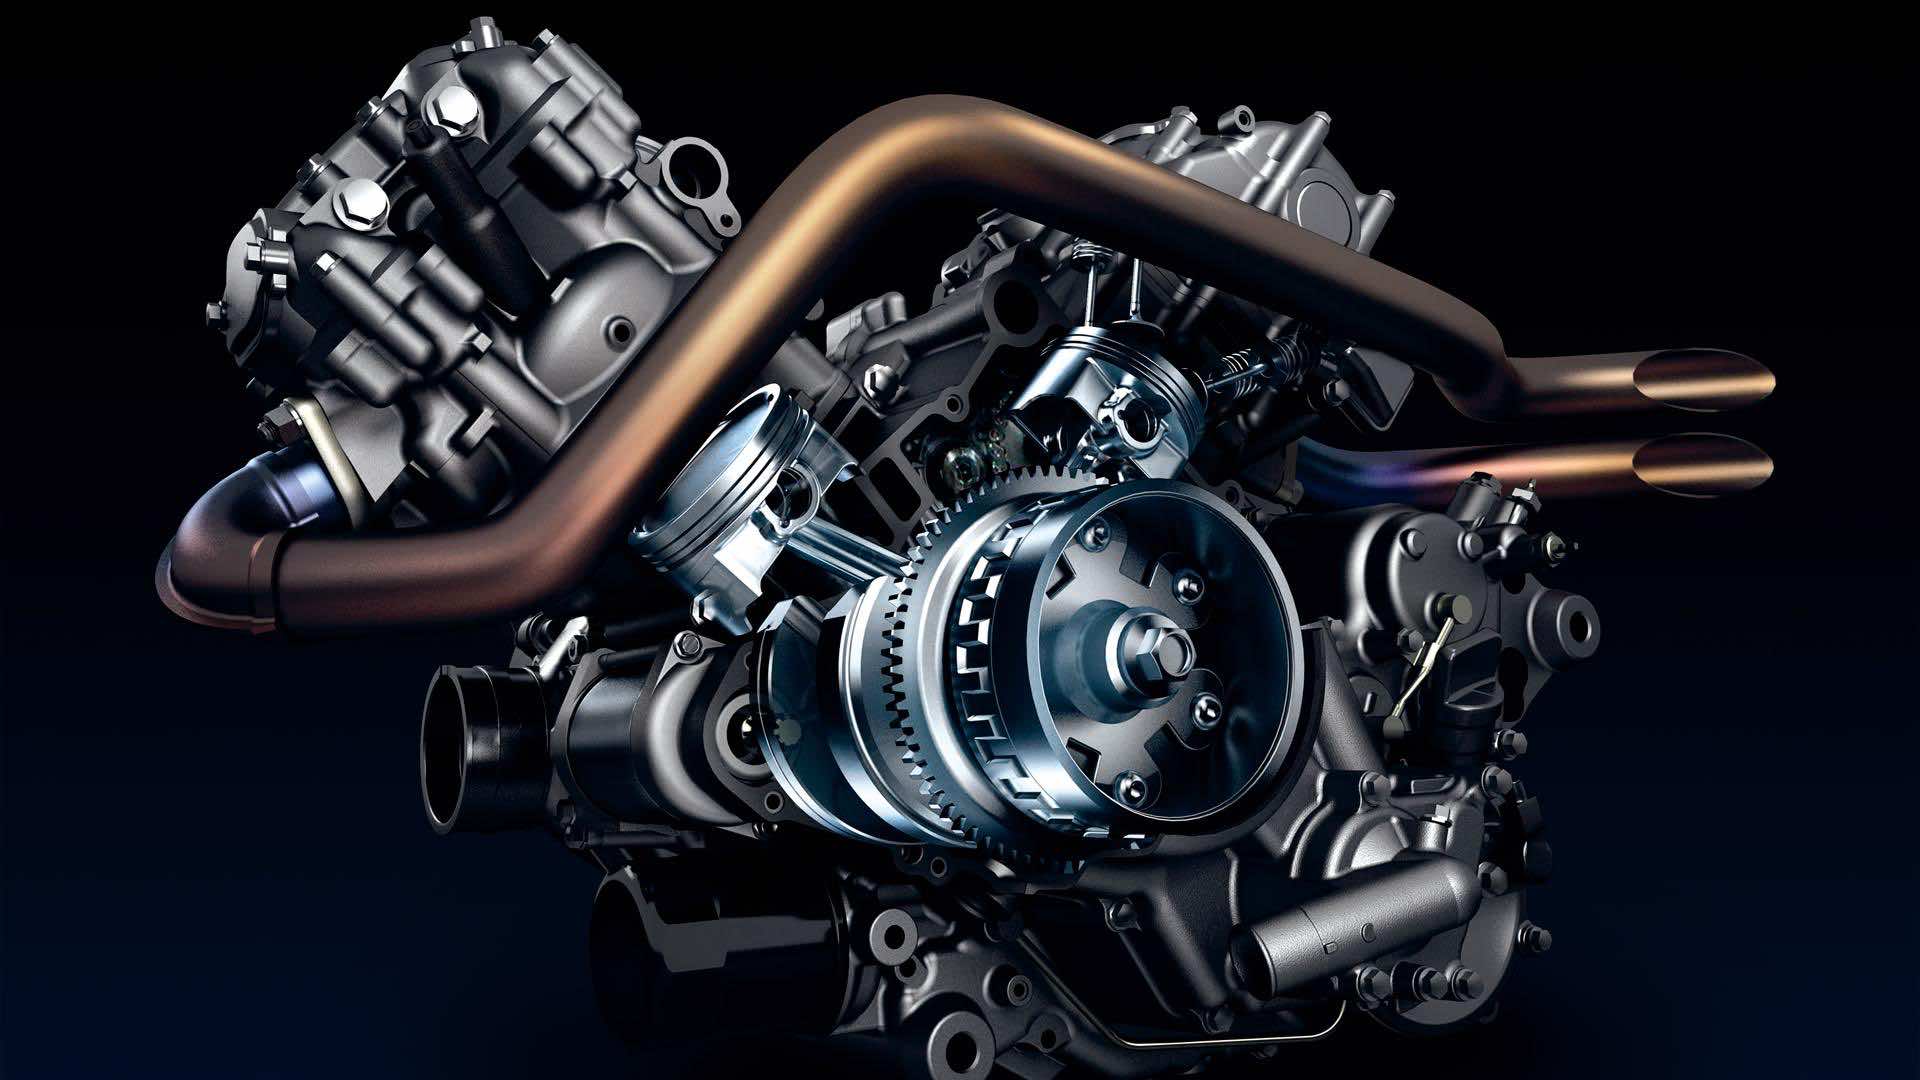 40 HD Engine Wallpapers Engine Backgrounds amp Engine Images